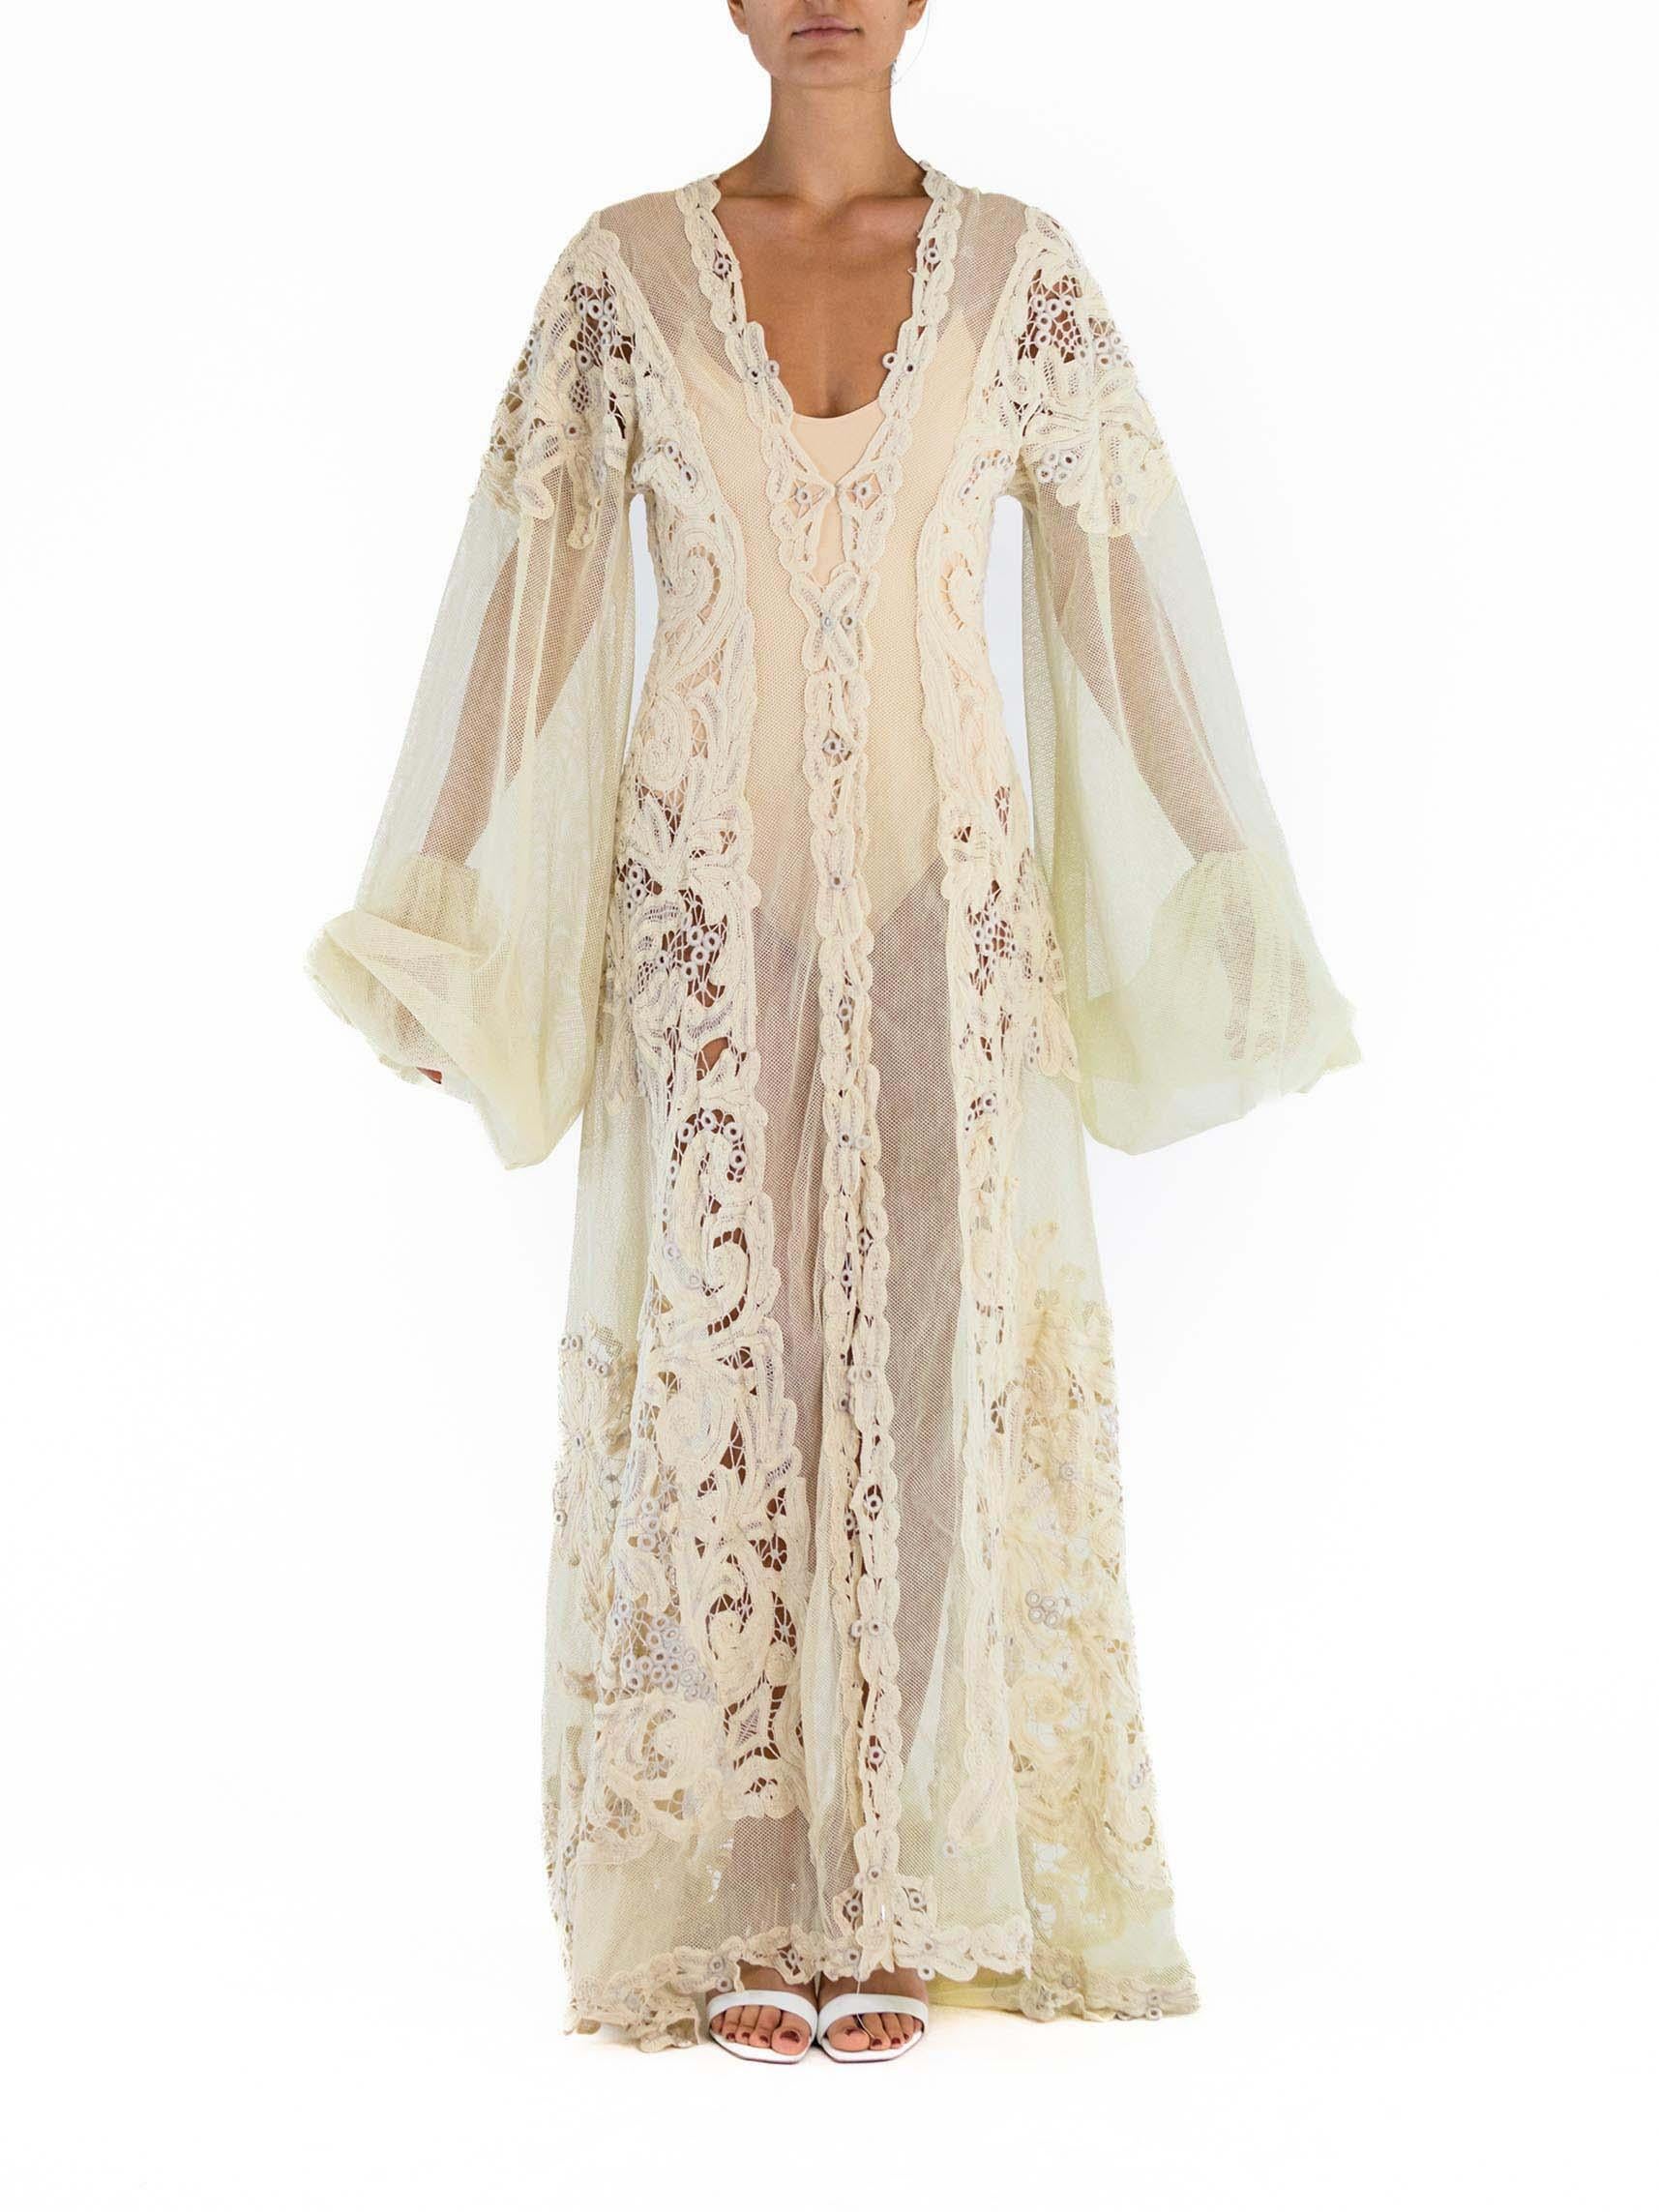 MORPHEW ATELIER Cream Cotton Net & Handmade Victorian Tape Lace Gown With Giant Sleeves